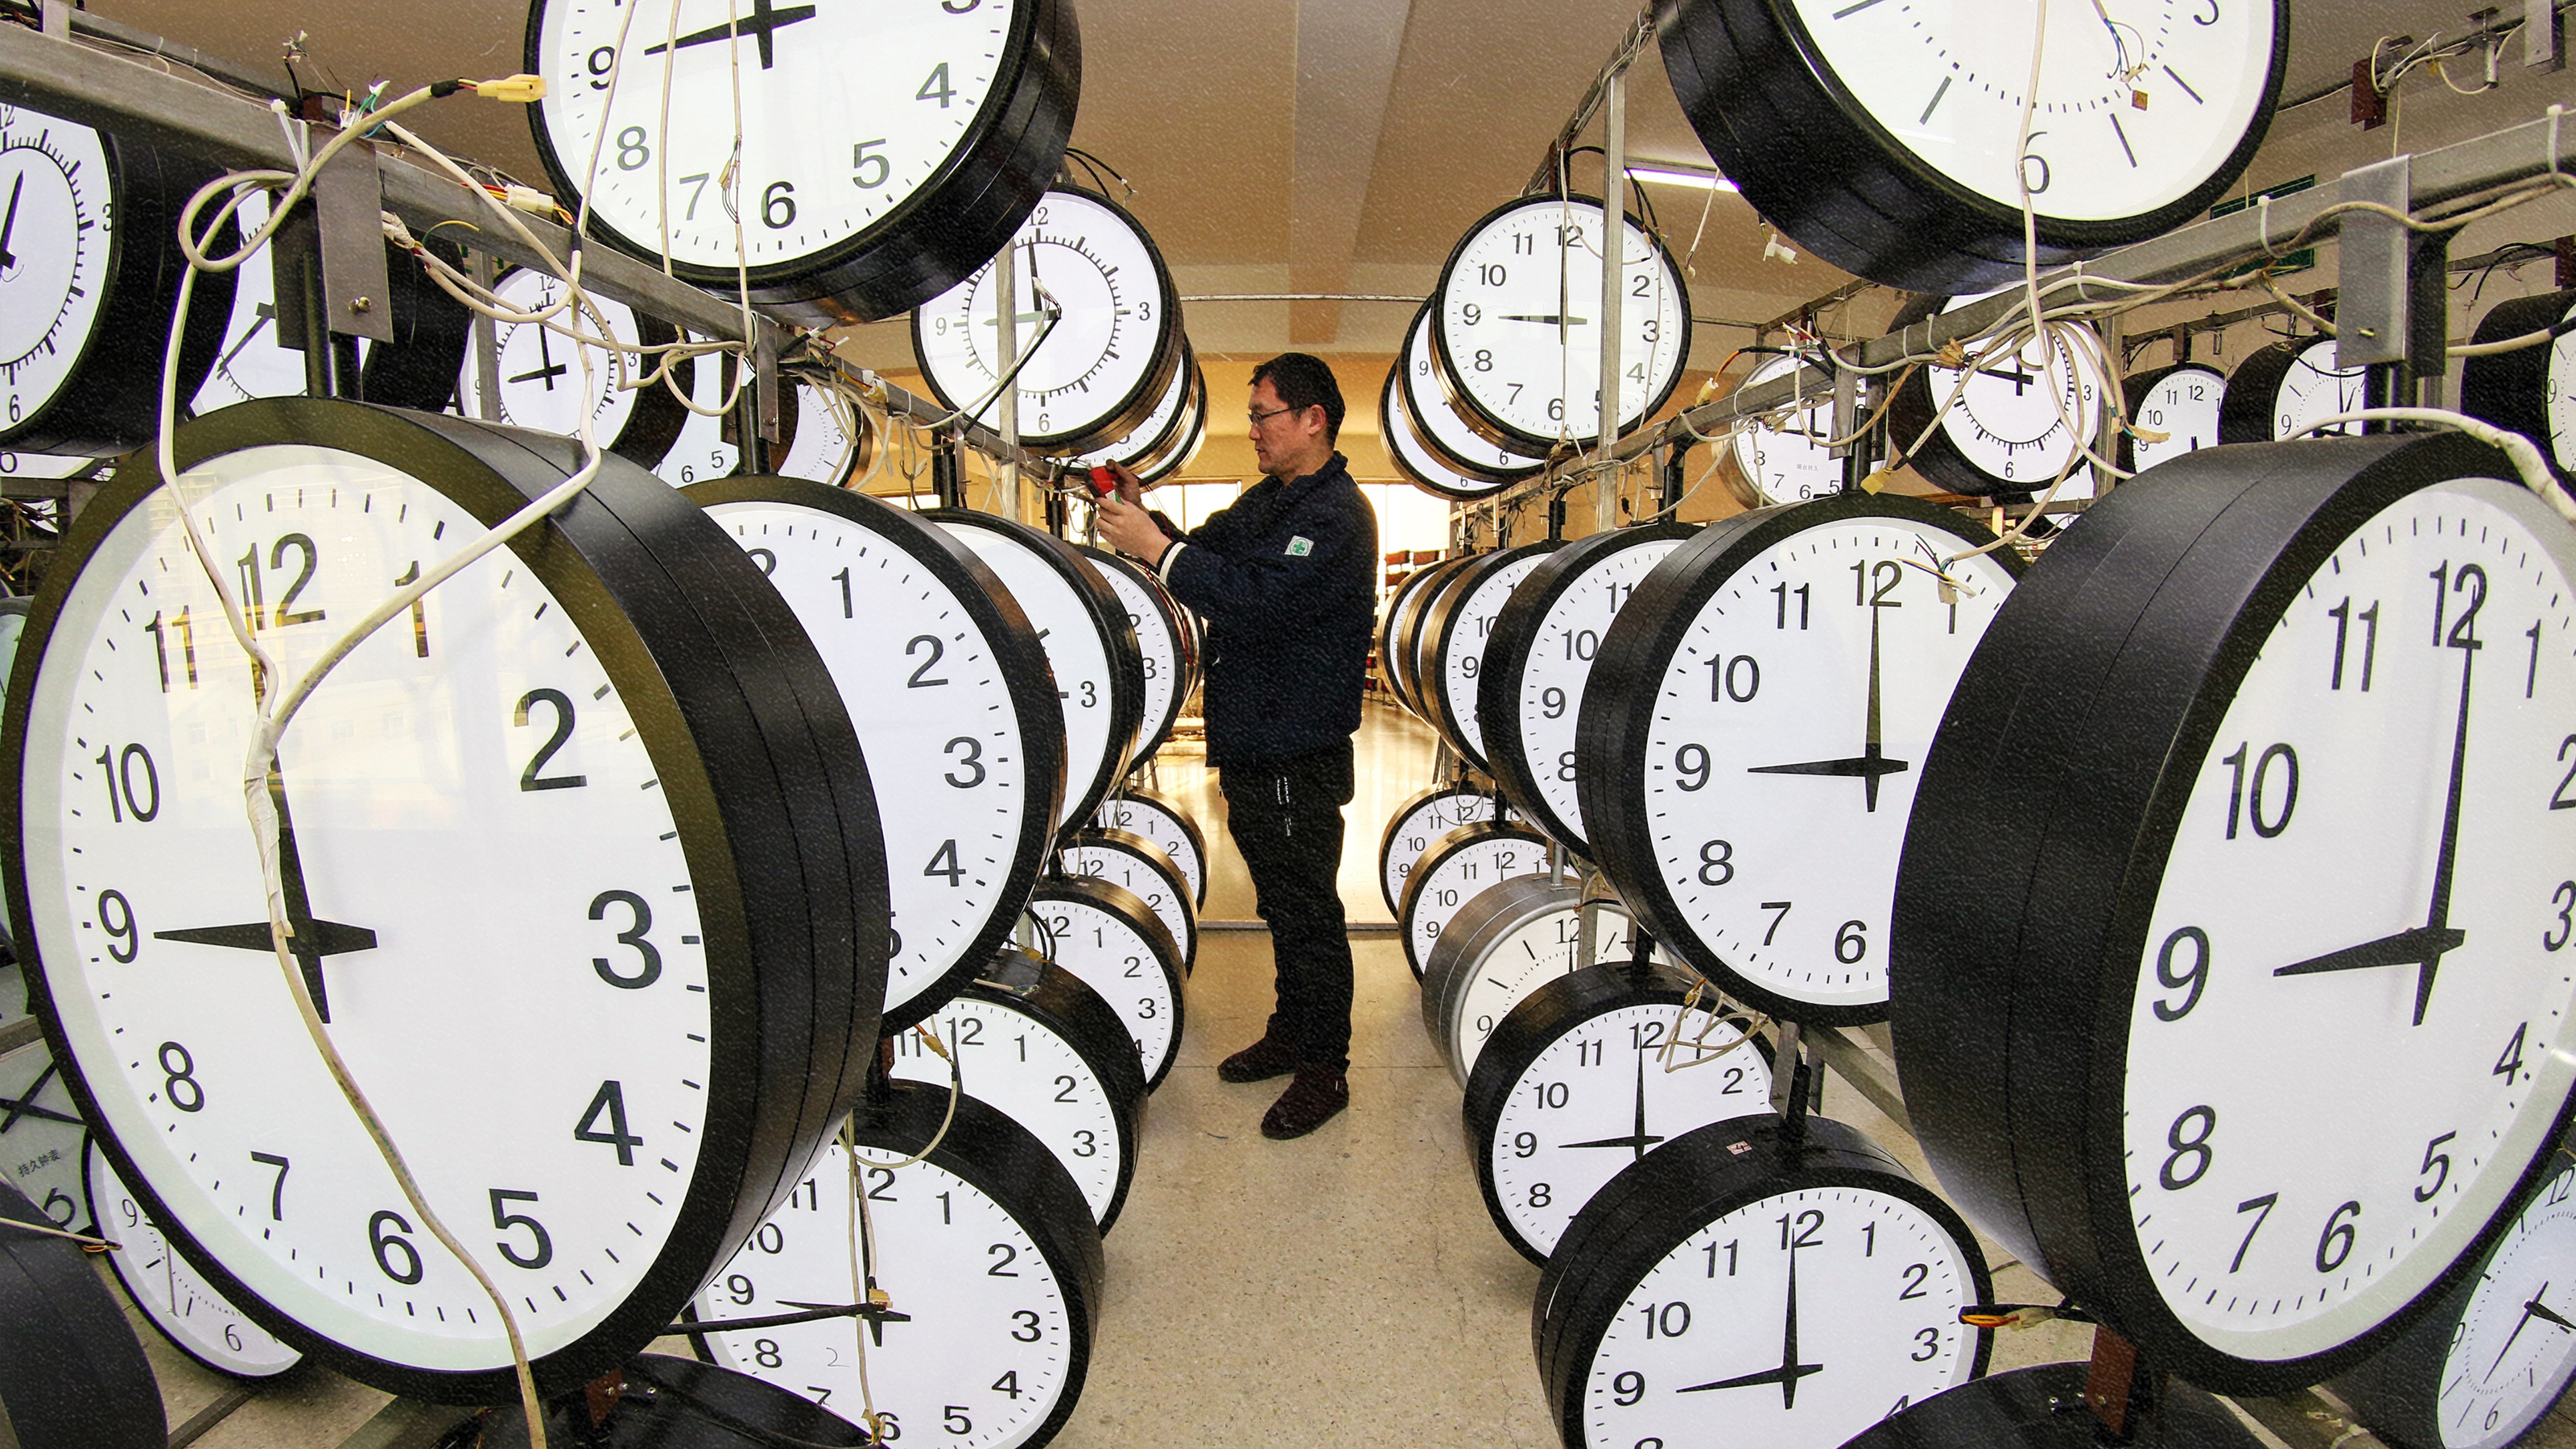 A man surrounded by clocks in a room.